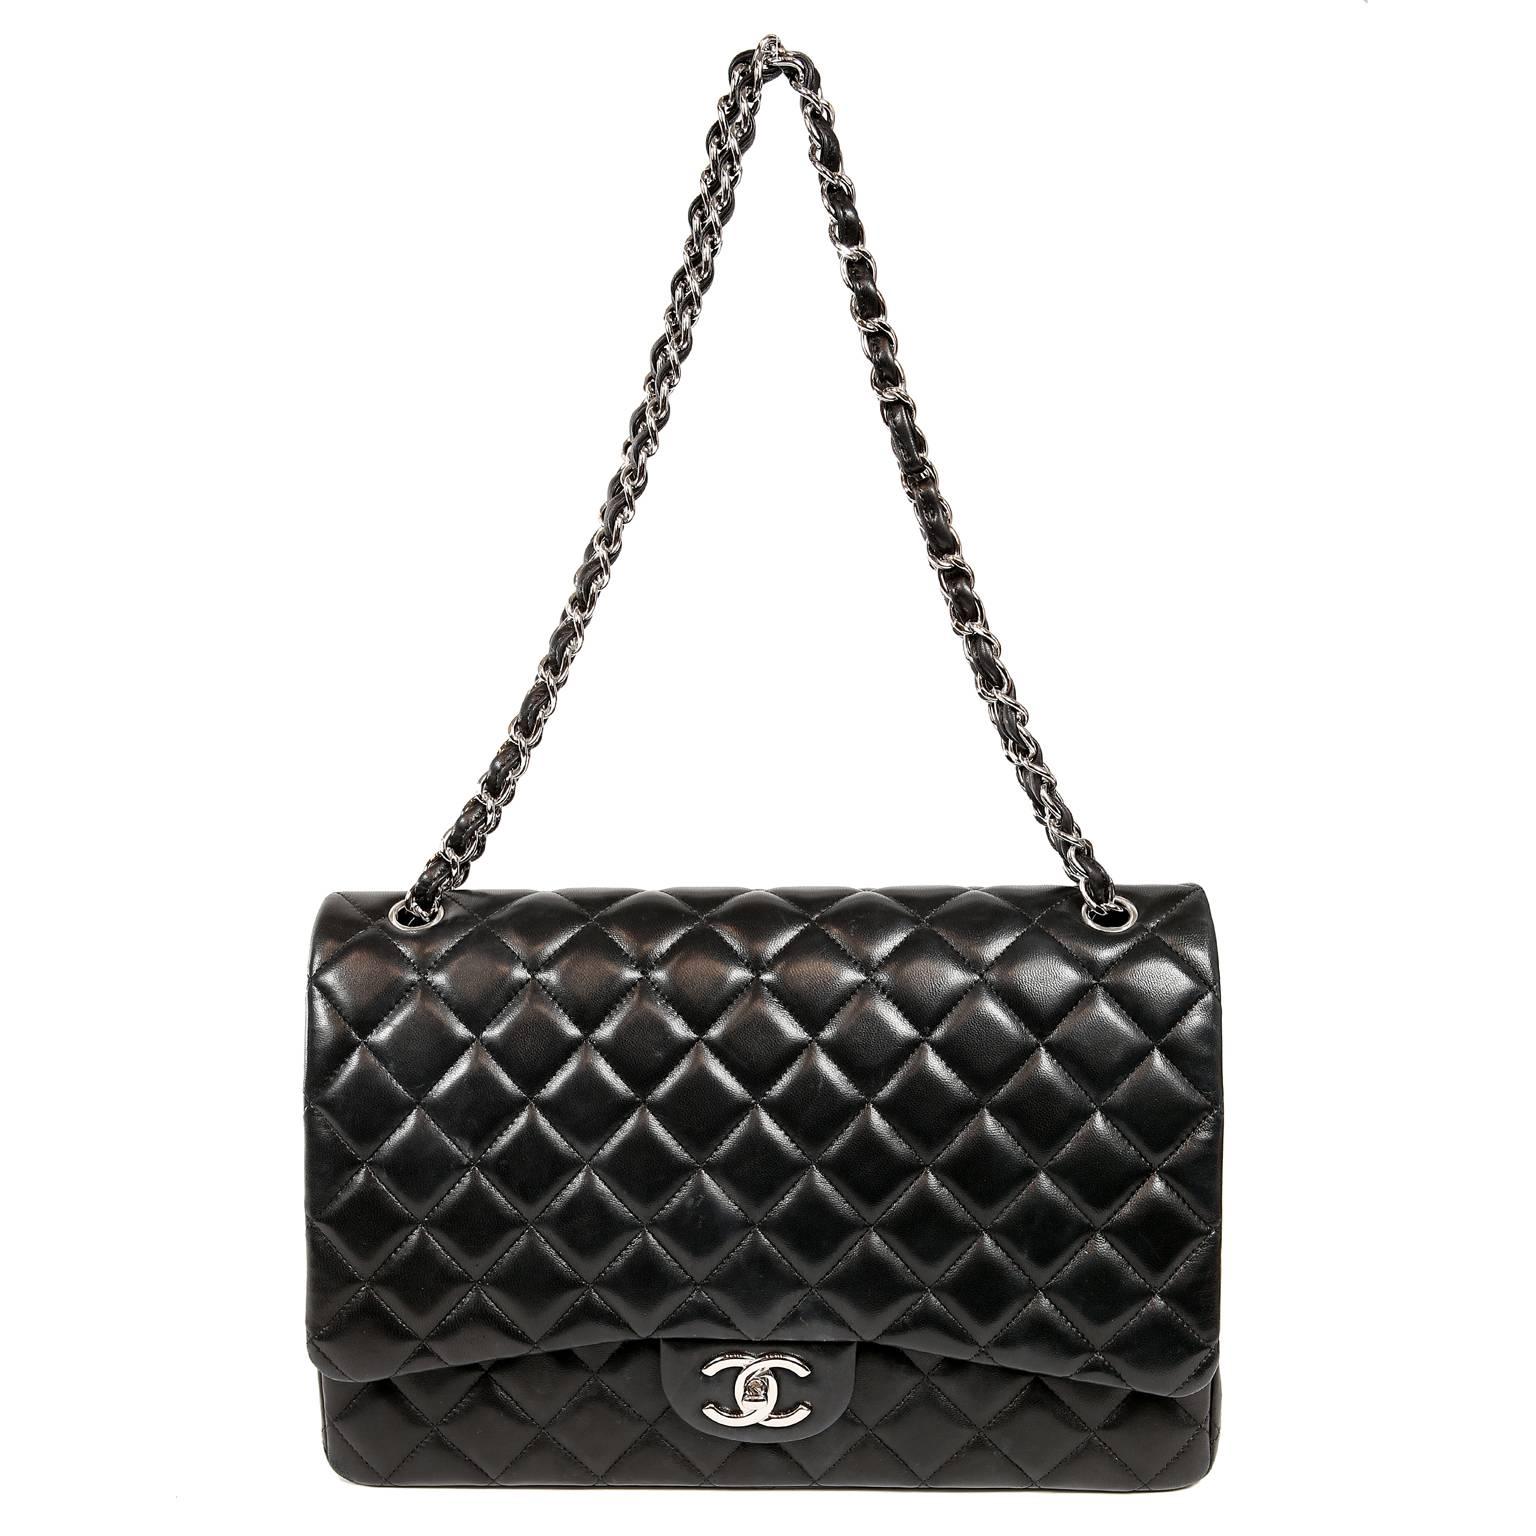 Chanel Black Lambskin Classic Maxi Double Flap Bag with Silver Hardware 8